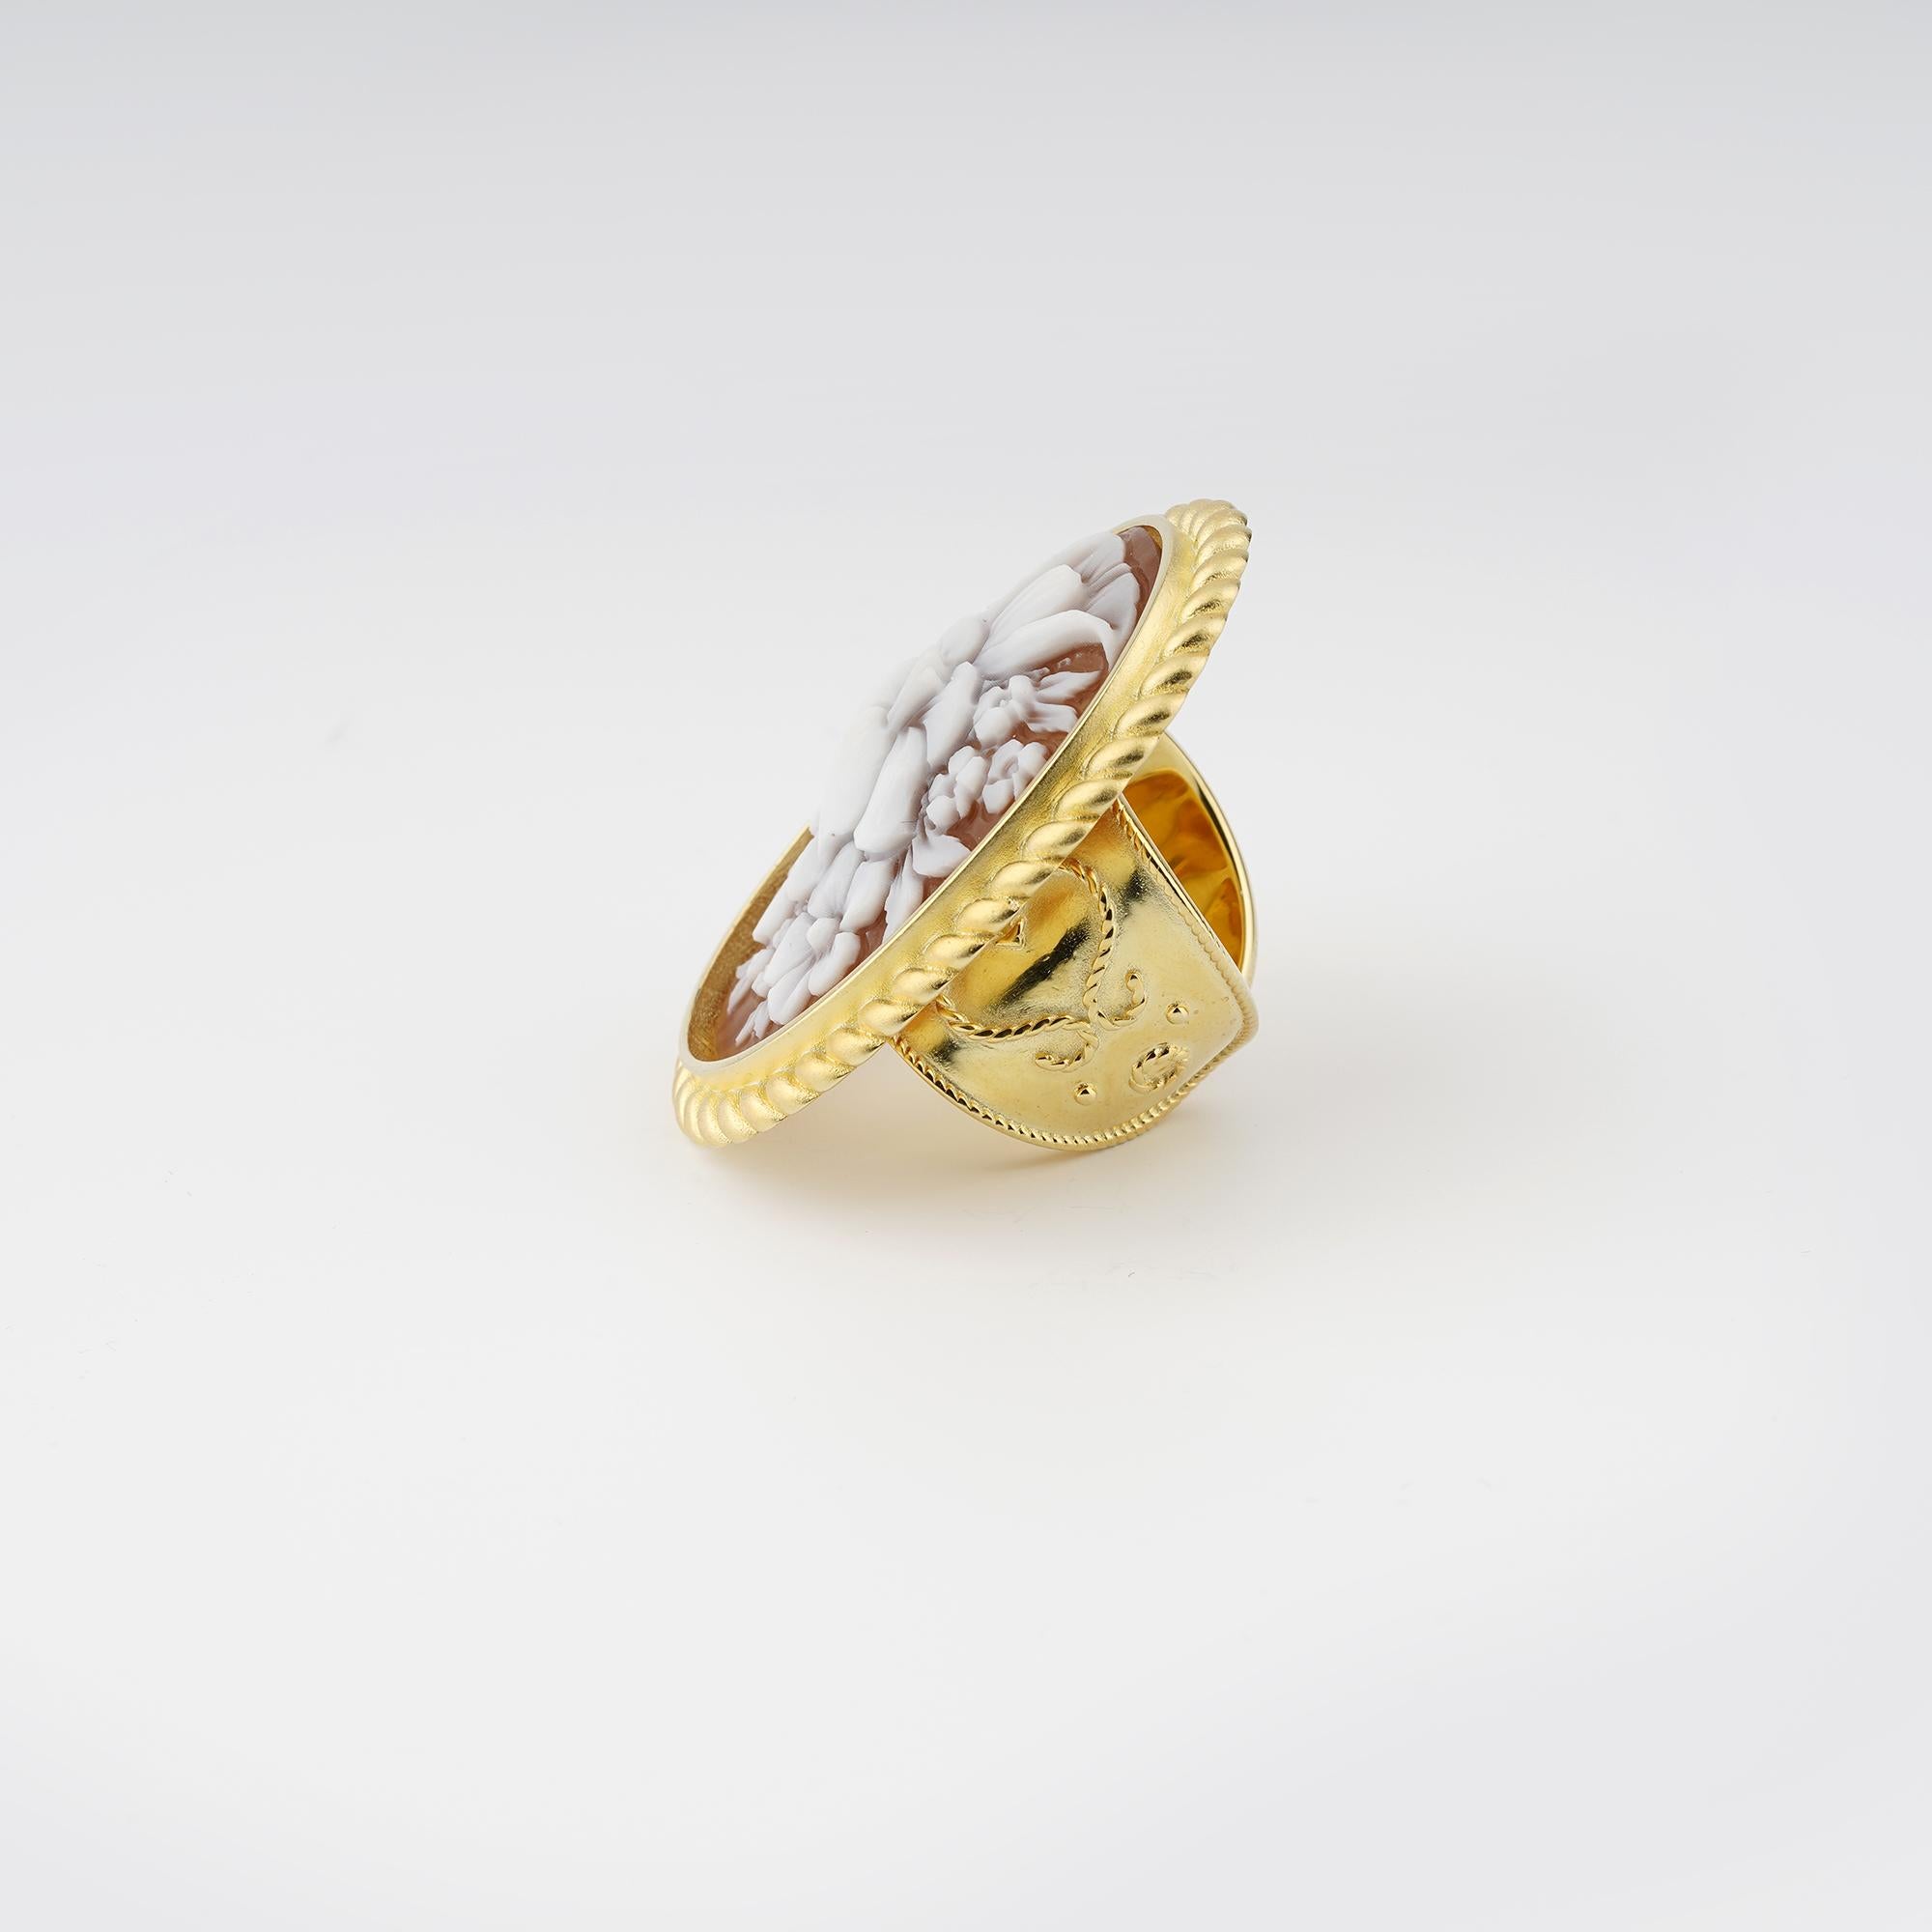 18 carat Gold Plated 925 Sterling Silver with 38mm Sea Shell Cameo adjustable ring. Fully handcarved Bouquet on a sea shell cameo set in a 18kt Gold plated silver adjustable shank ring. Carvings are performed by our master artisans with generations